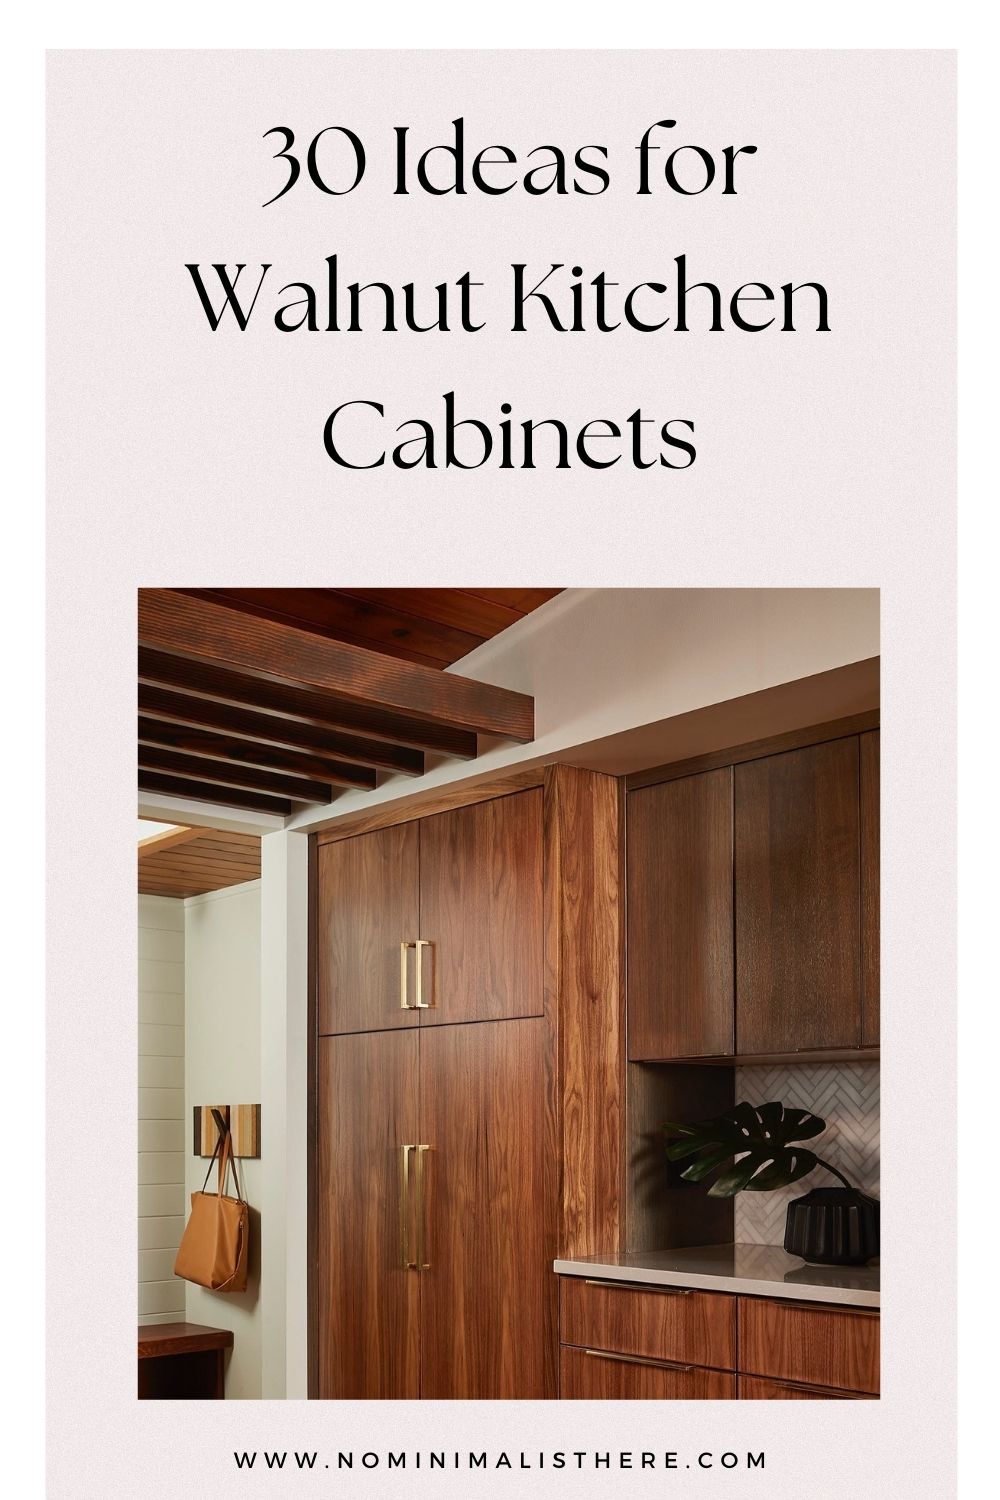 pinterest image for an article about walnut kitchen cabinets